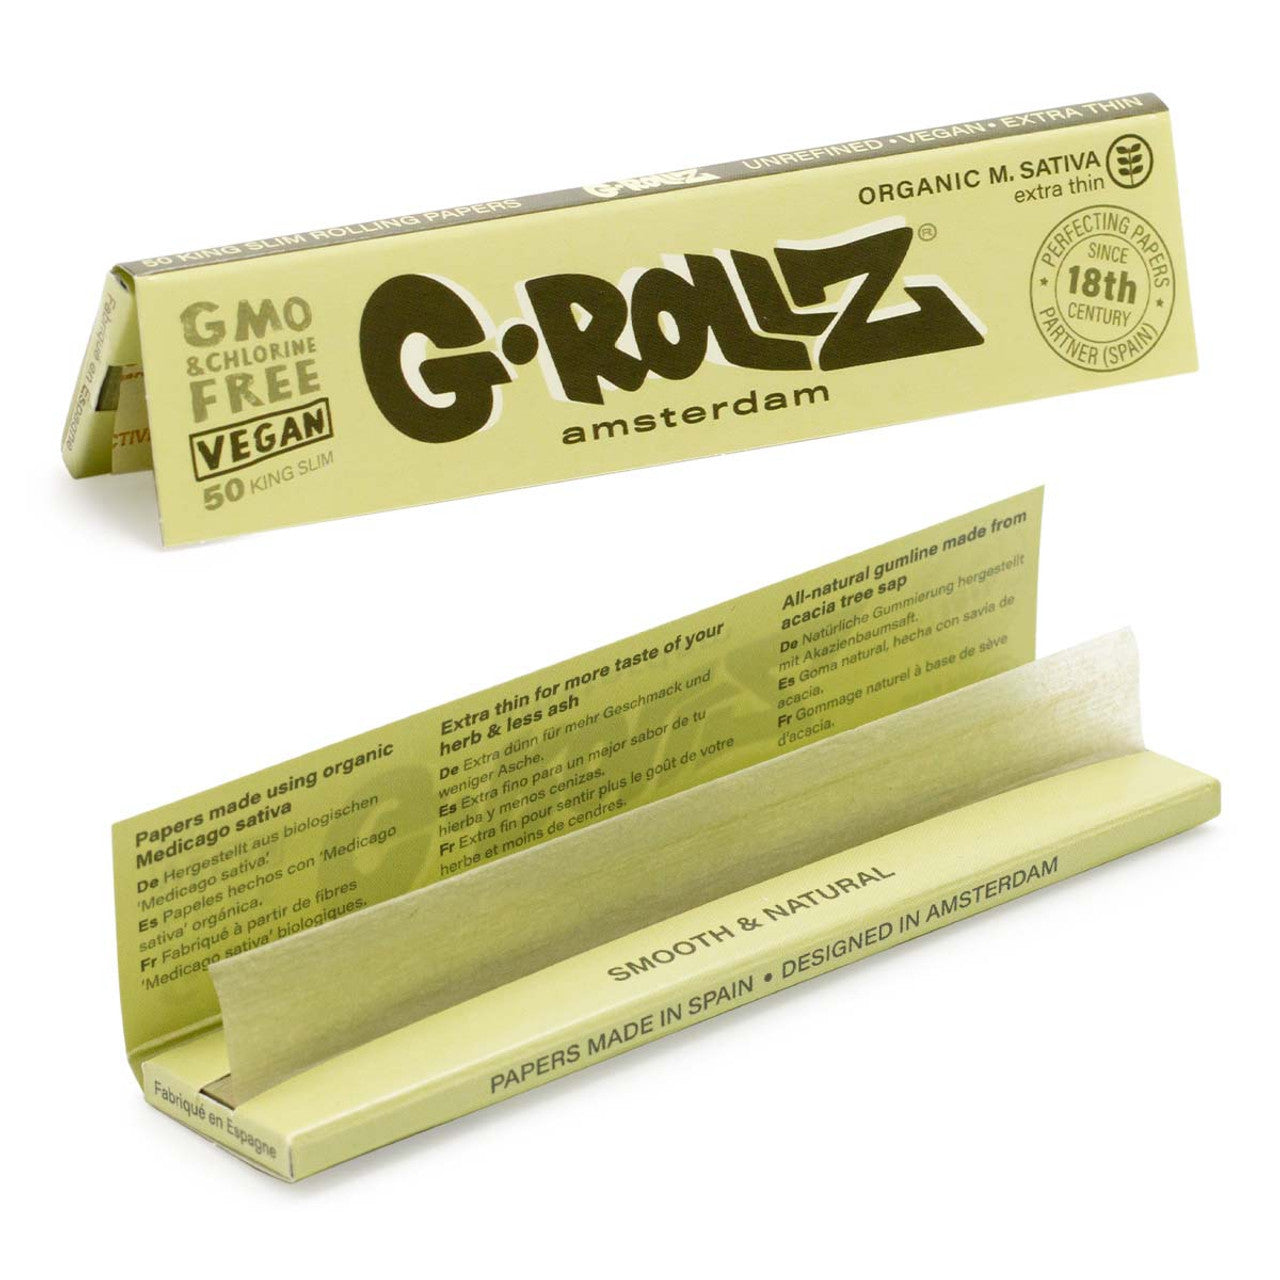 G Rollz Papers - Medicago Sativa Extra Thin (King Slim Size)